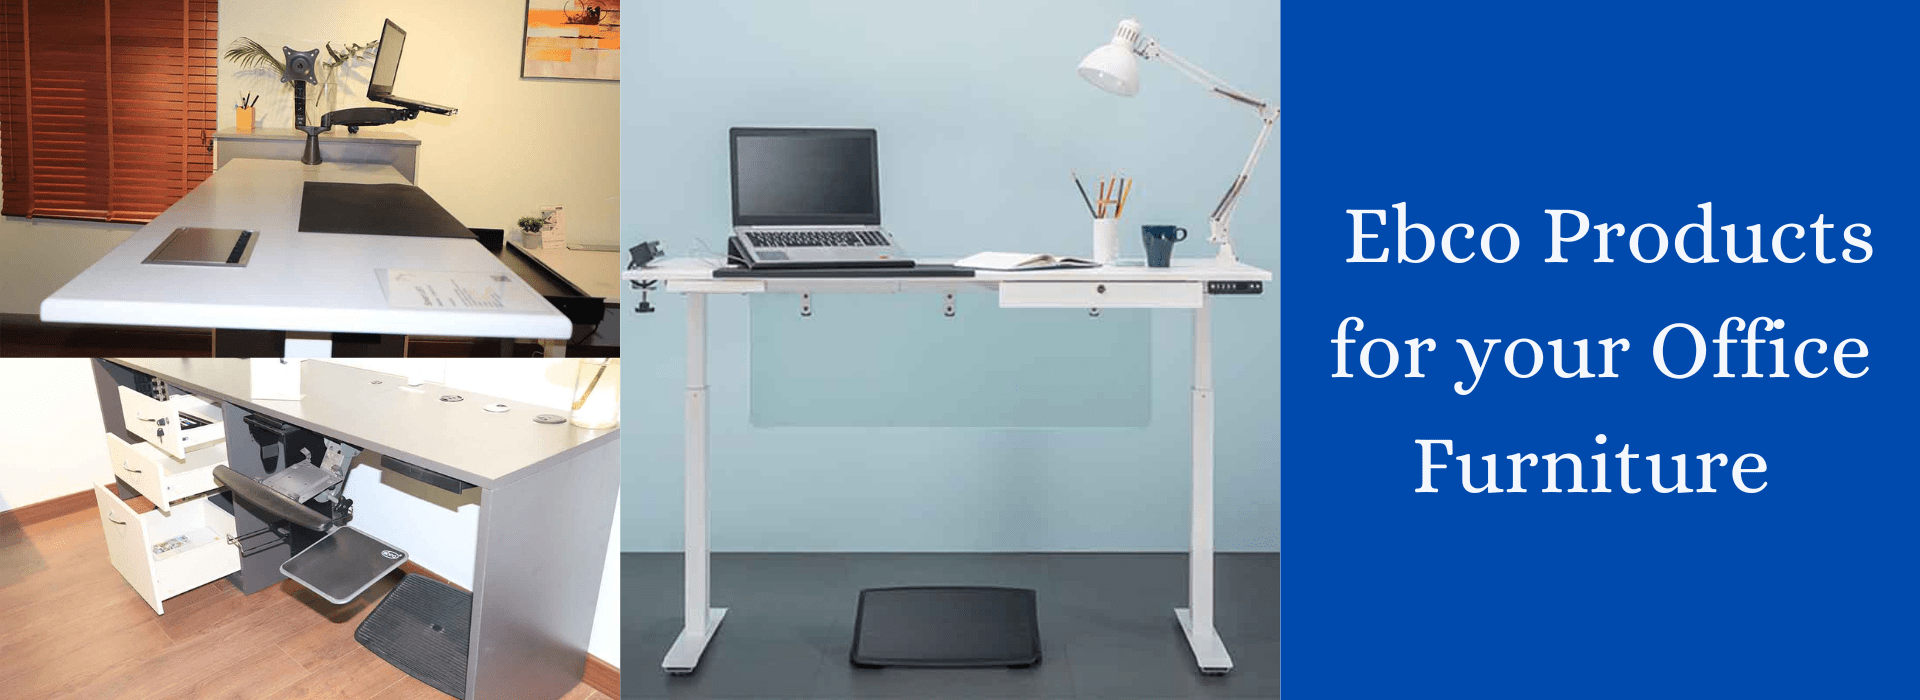 Ebco products for your office furniture